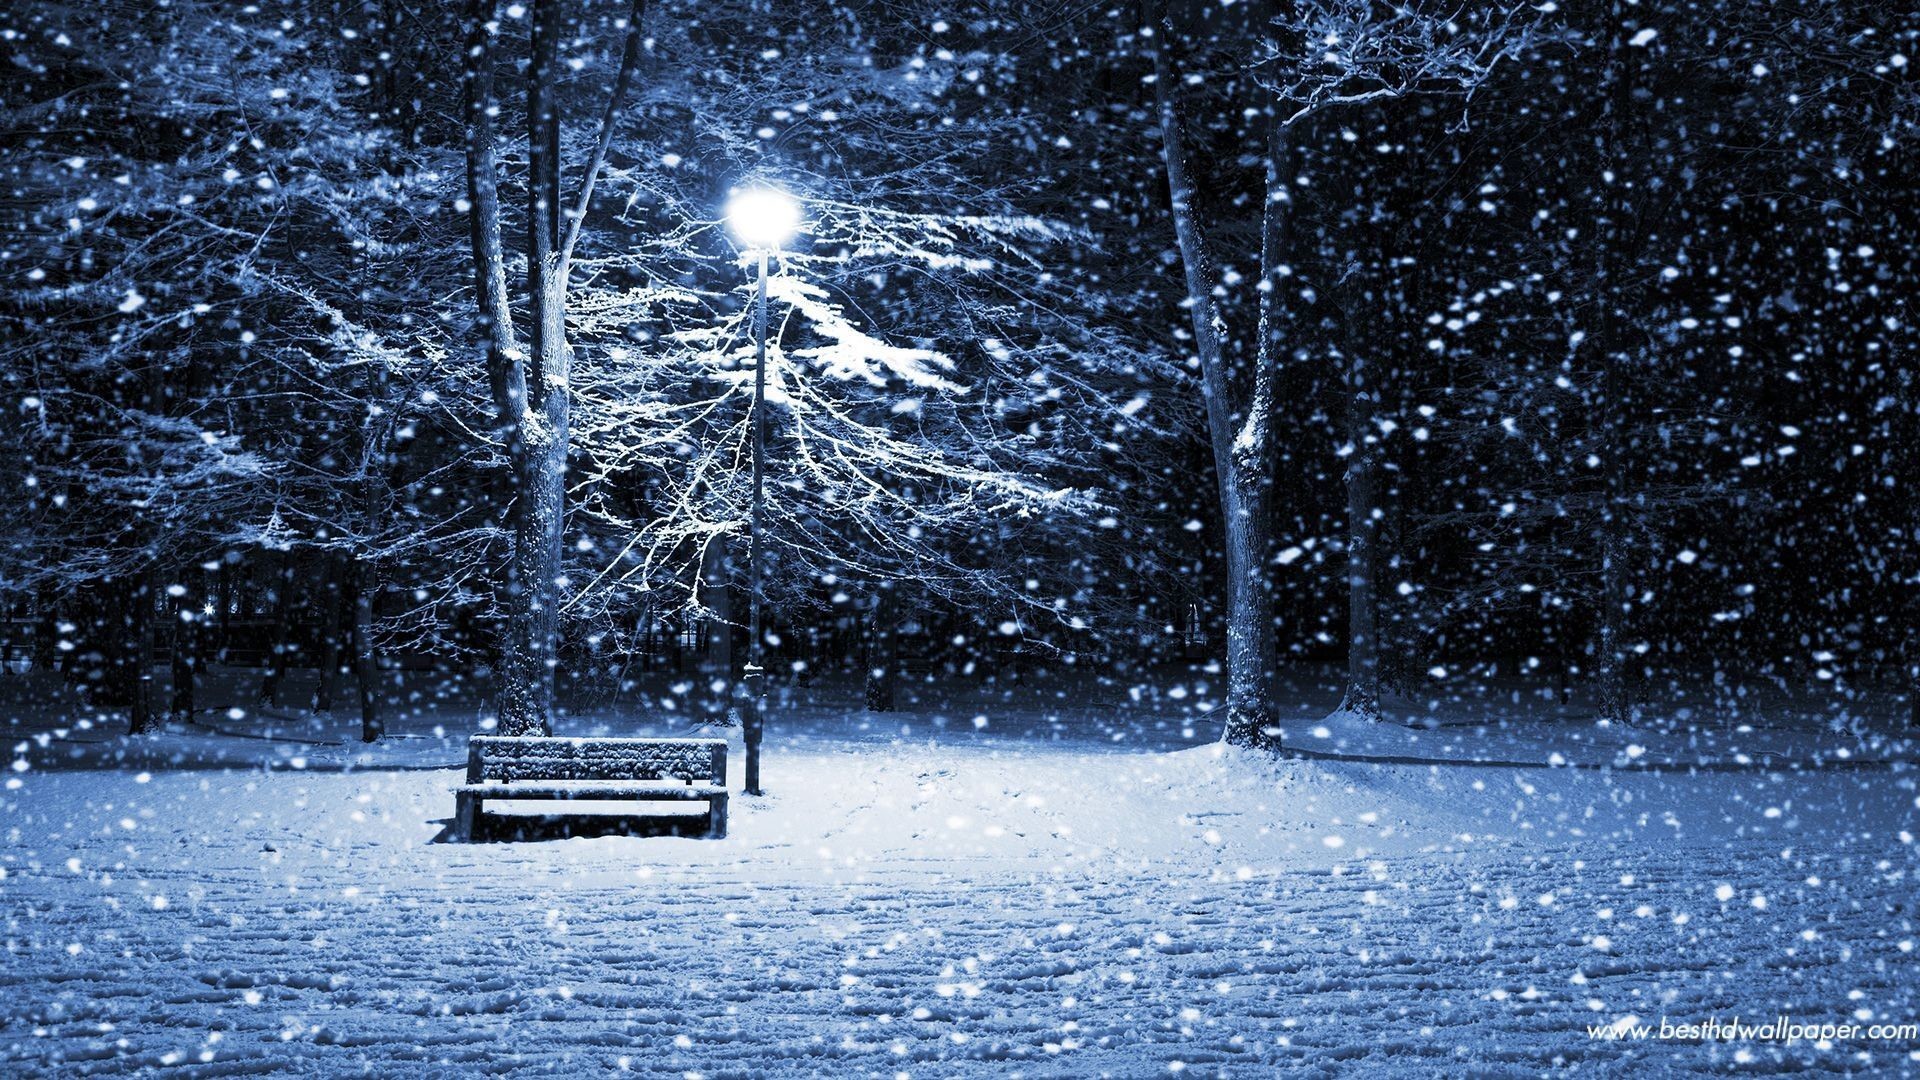 1920x1080 Christmas Snow Wallpapers For Iphone For Desktop Wallpaper 1920 x 1080 px  623.08 KB snow snowman